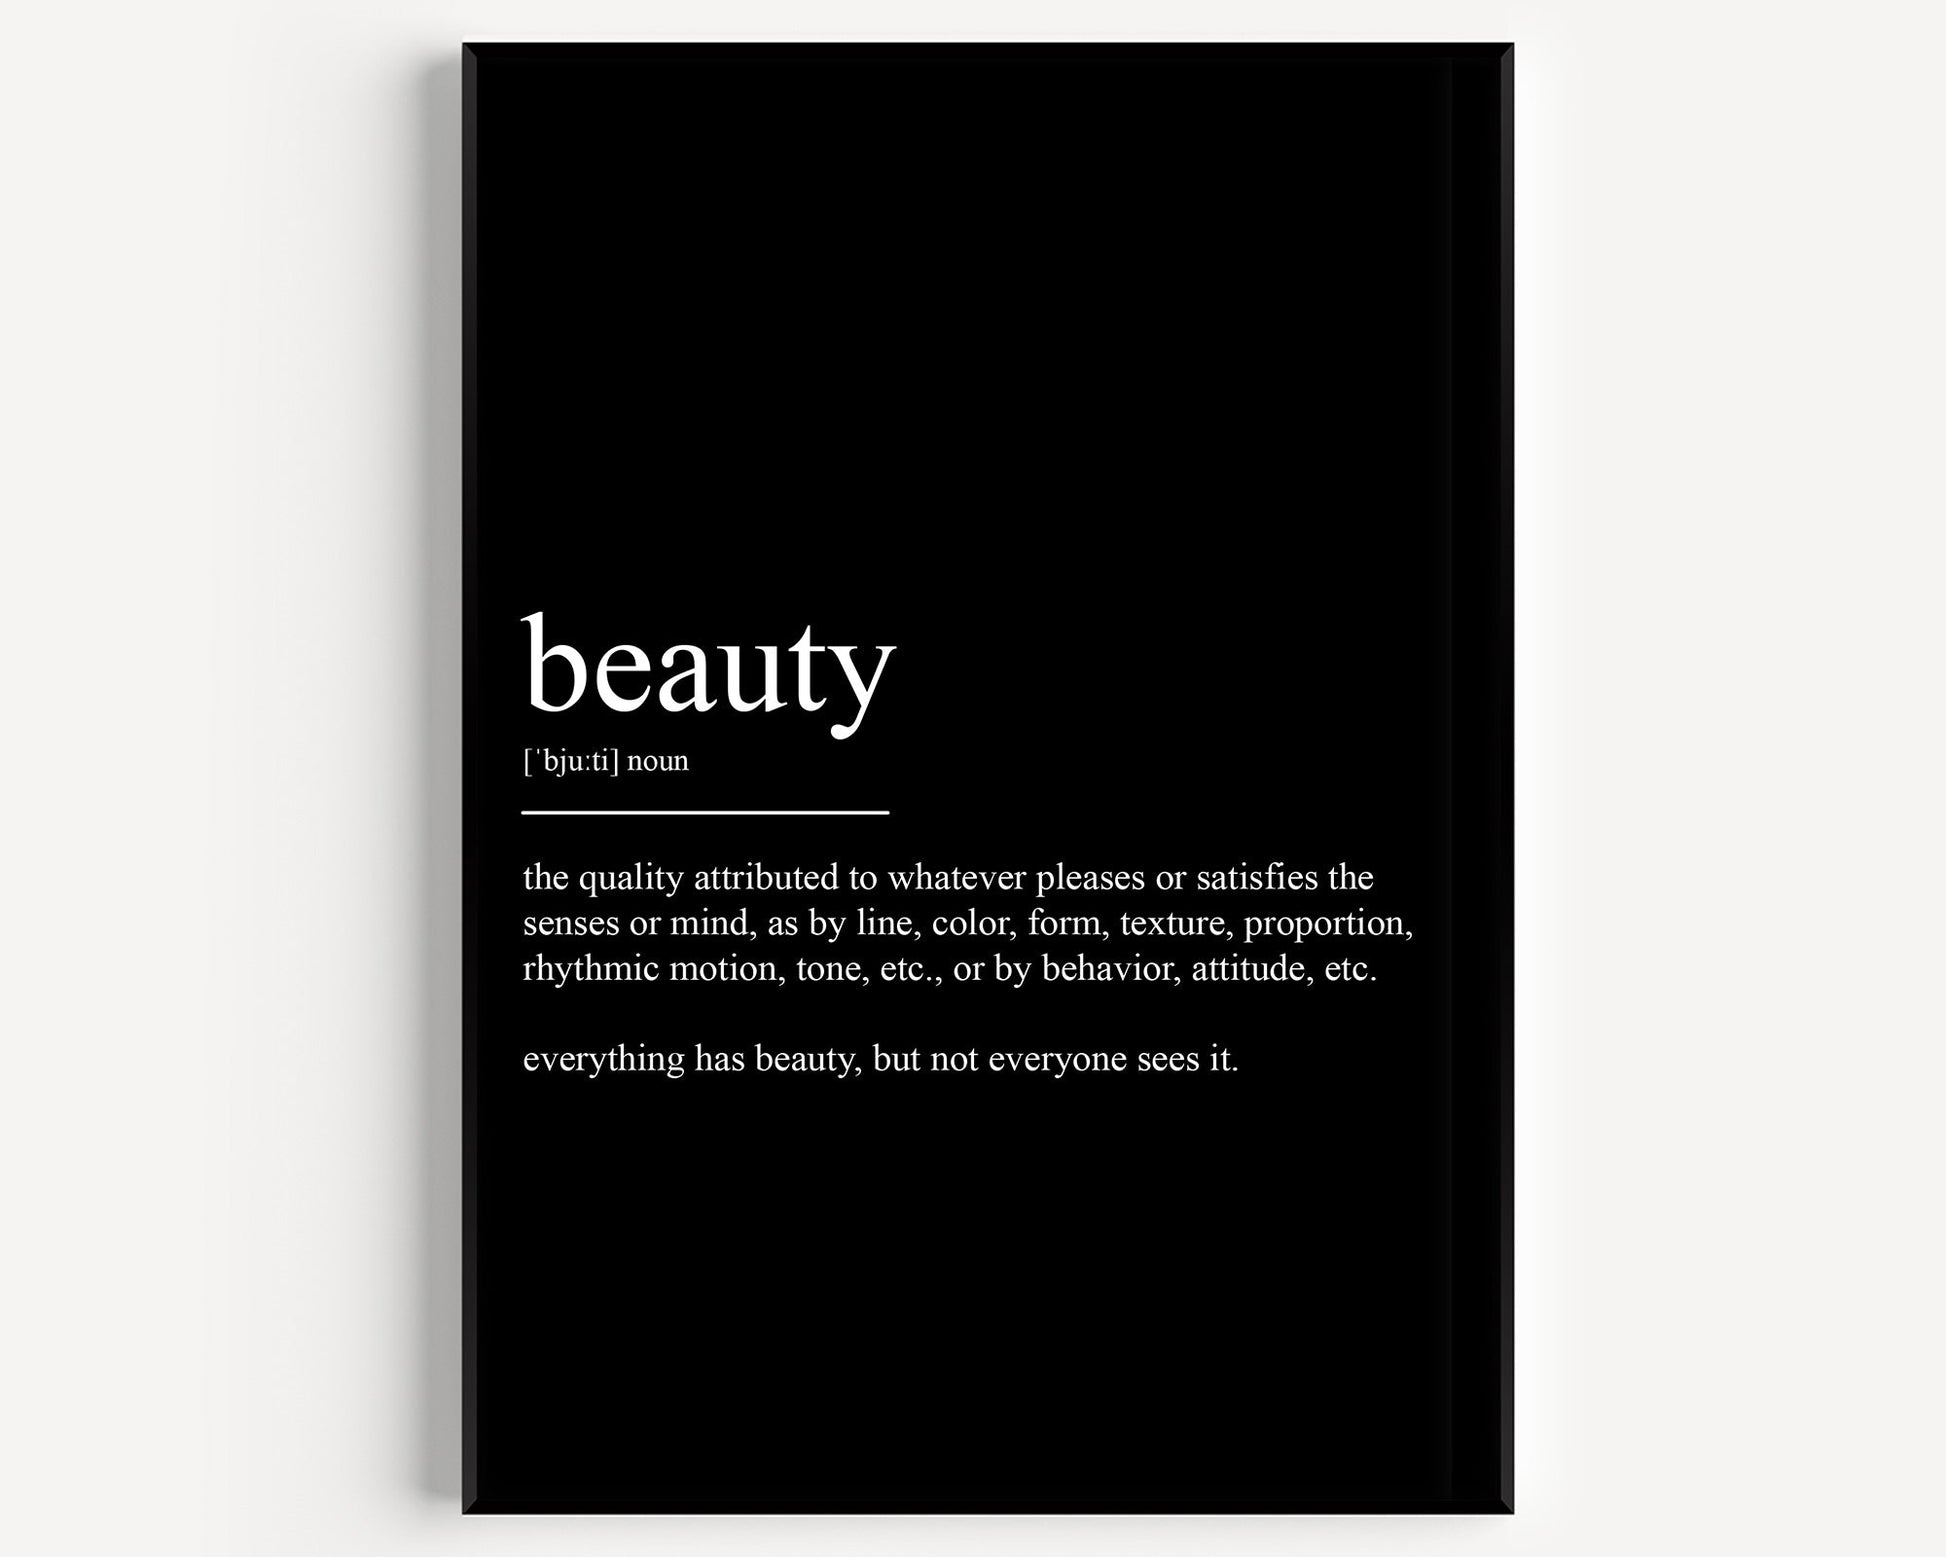 Beauty Definition Print - Magic Posters